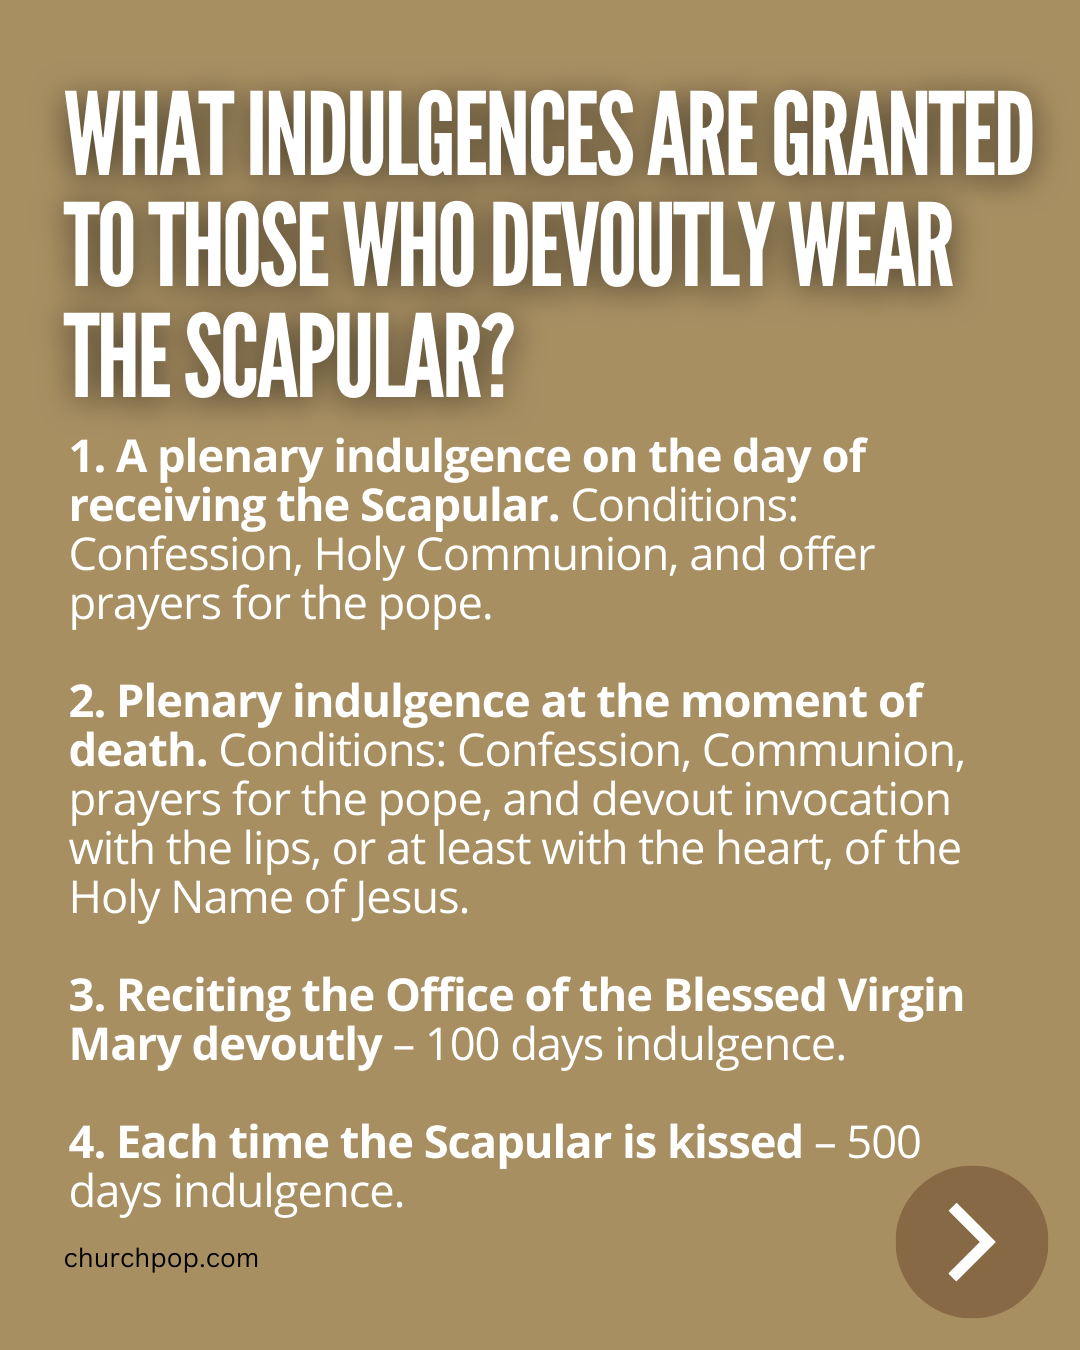 What indulgences are granted to those who devoutly wear the brown scapular?